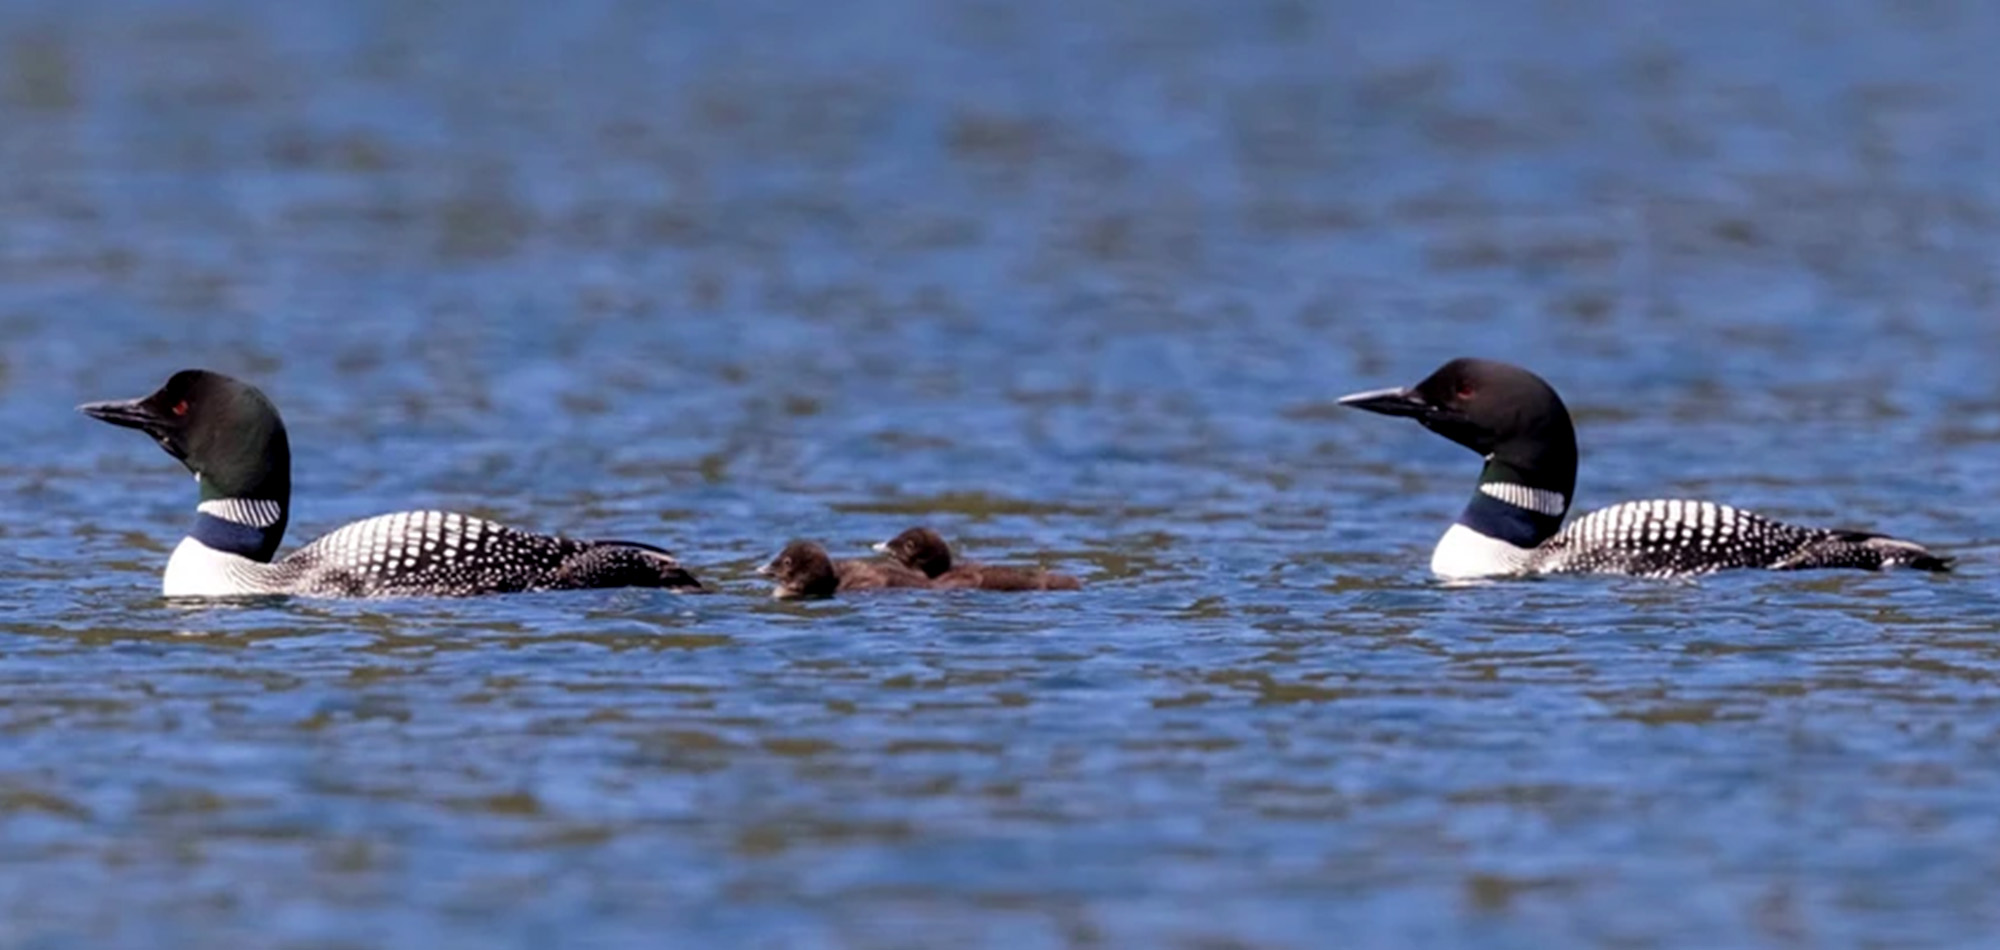 A family of loons in Washington State.